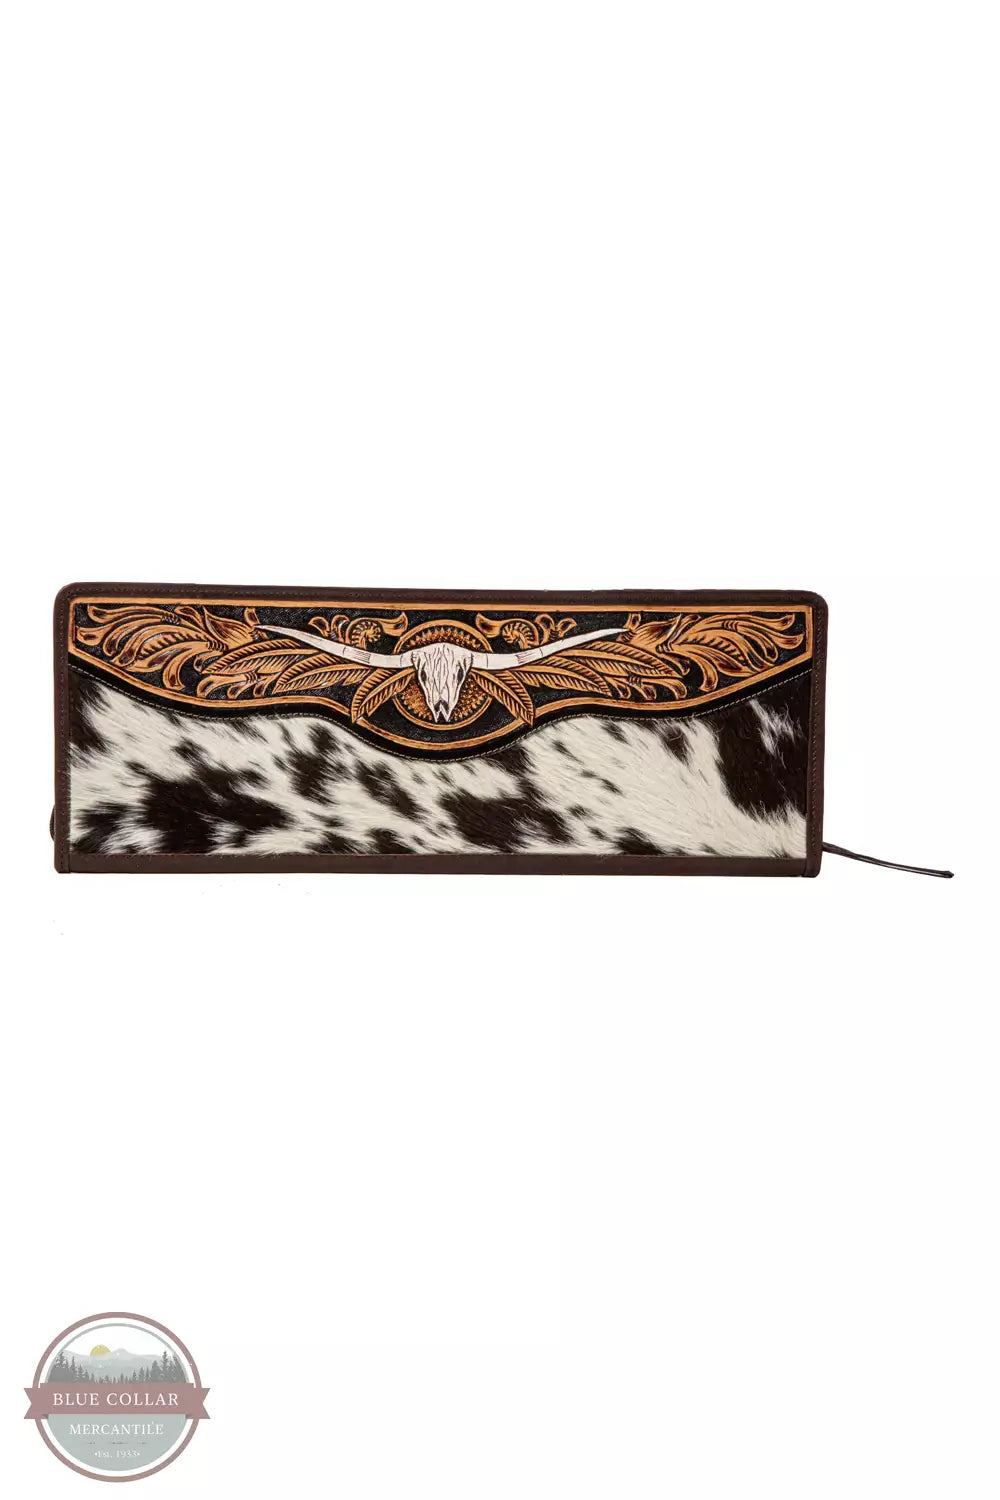 Myra Bag S-8091 Spirit of the Herd Hand Tooled Jewelry Case Back View